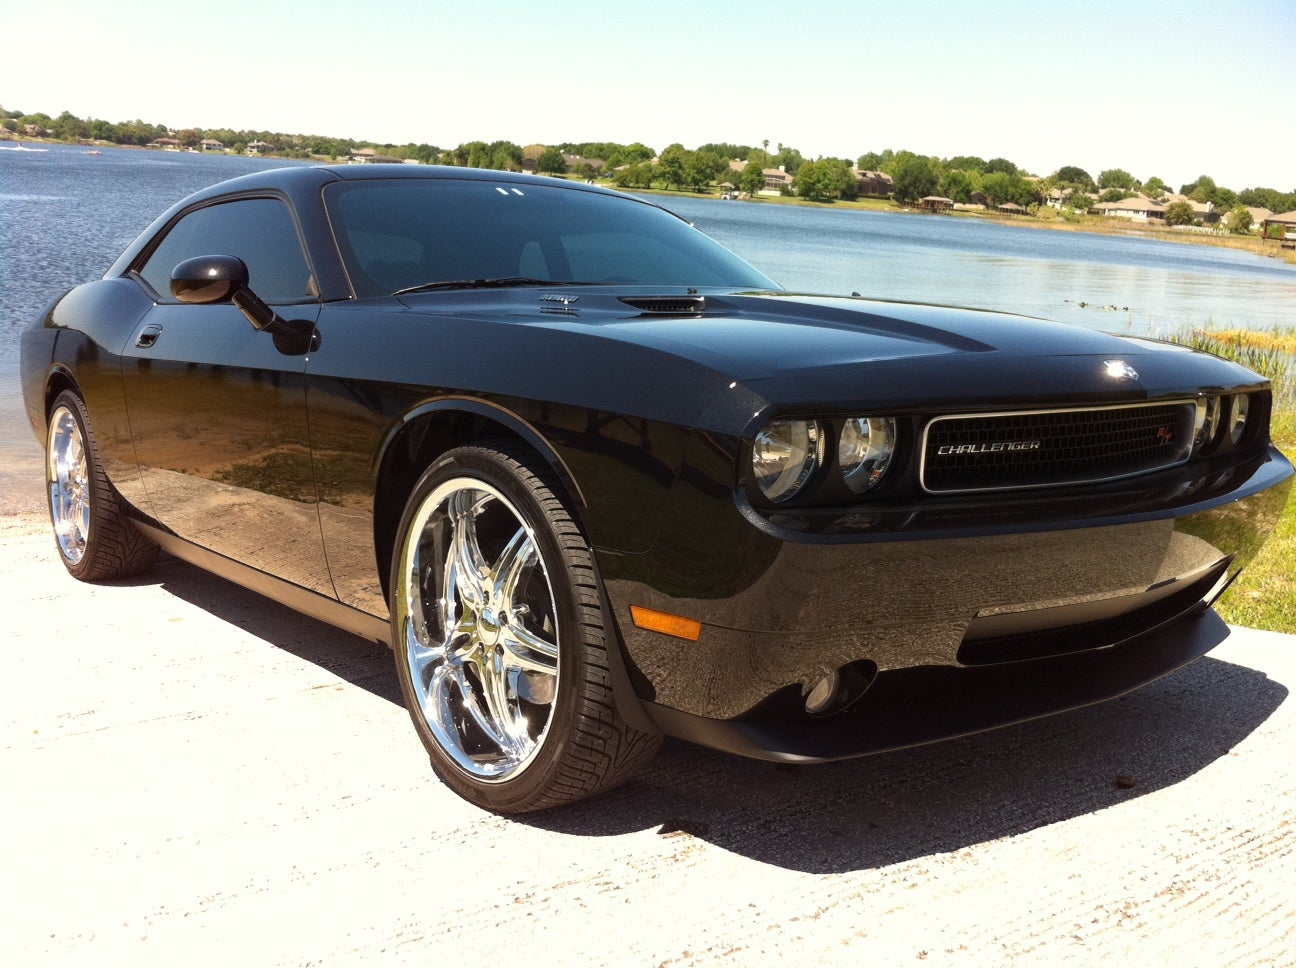 2010 Dodge Challenger R/T - Pictures - Picture of 2010 Dodge Challeng ...